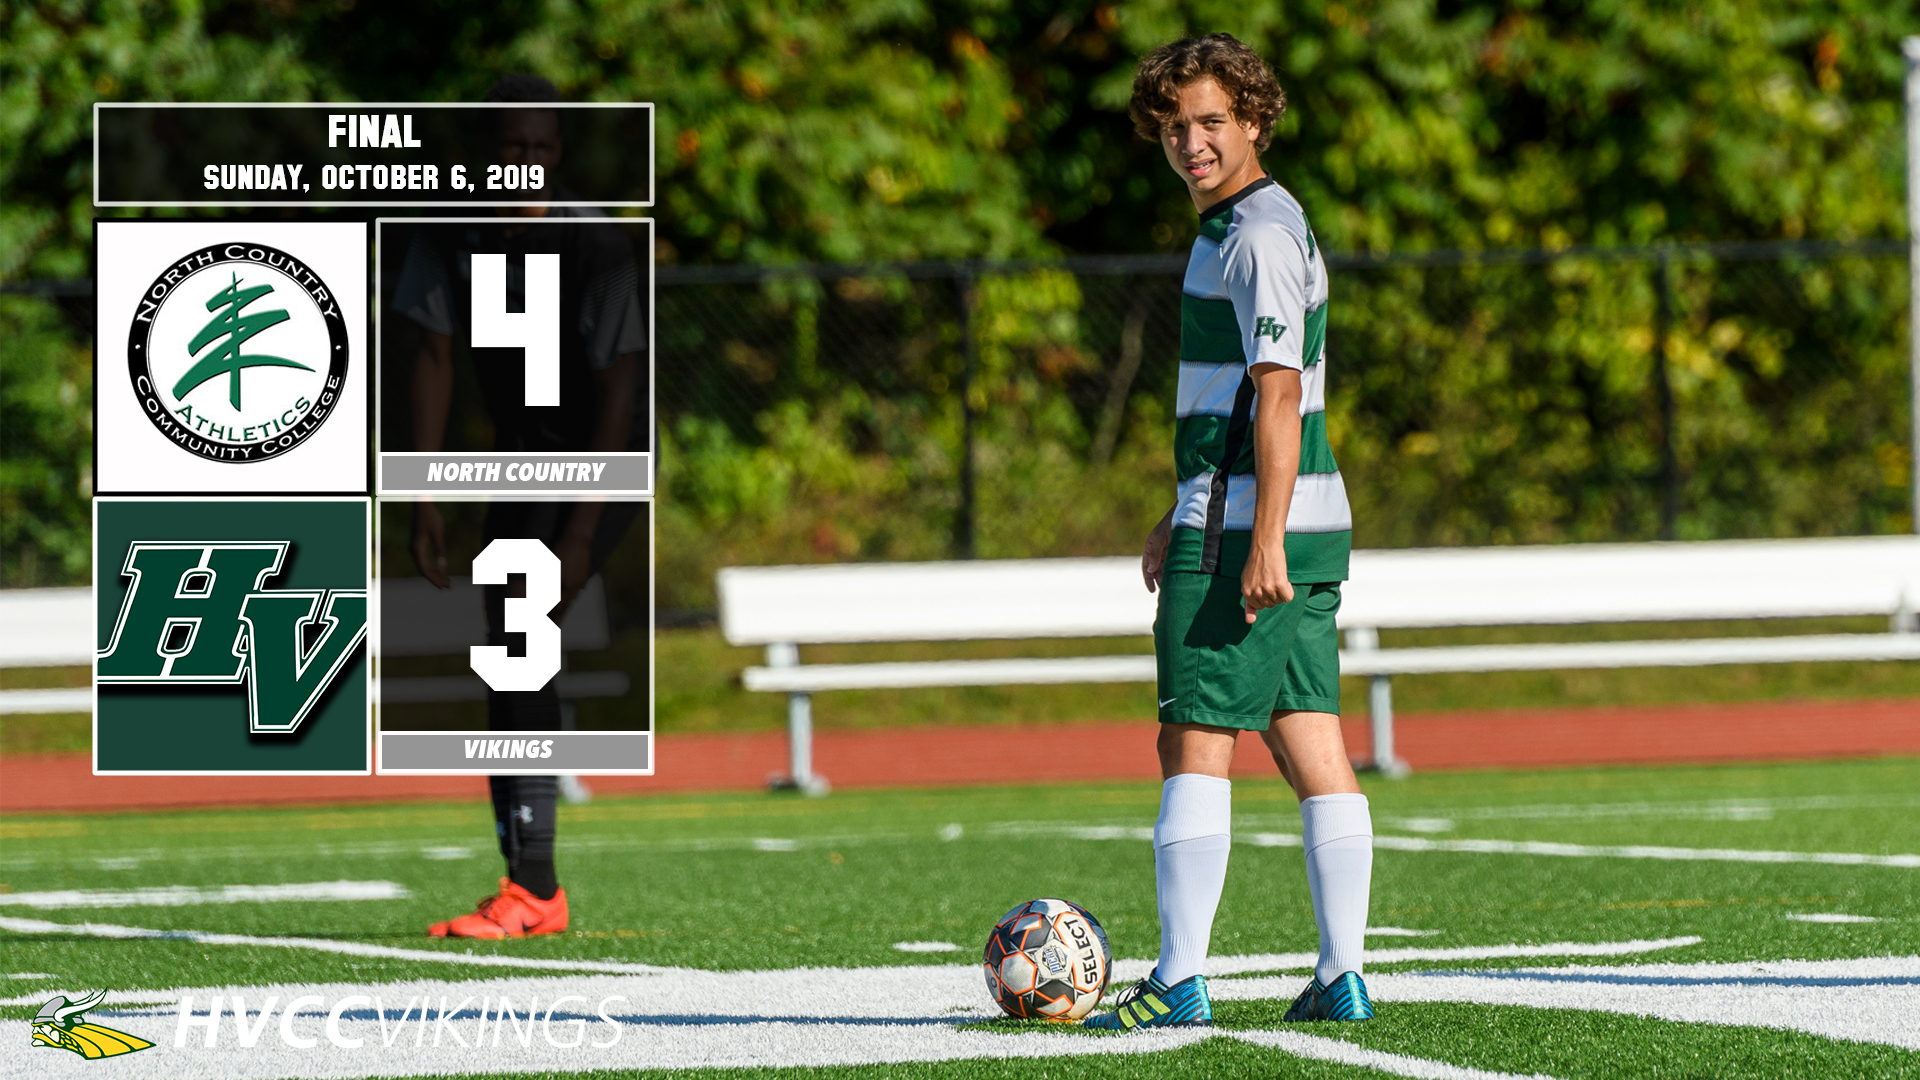 North Country defeated the Vikings men's soccer team 4-3 on Oct. 6, 2019.